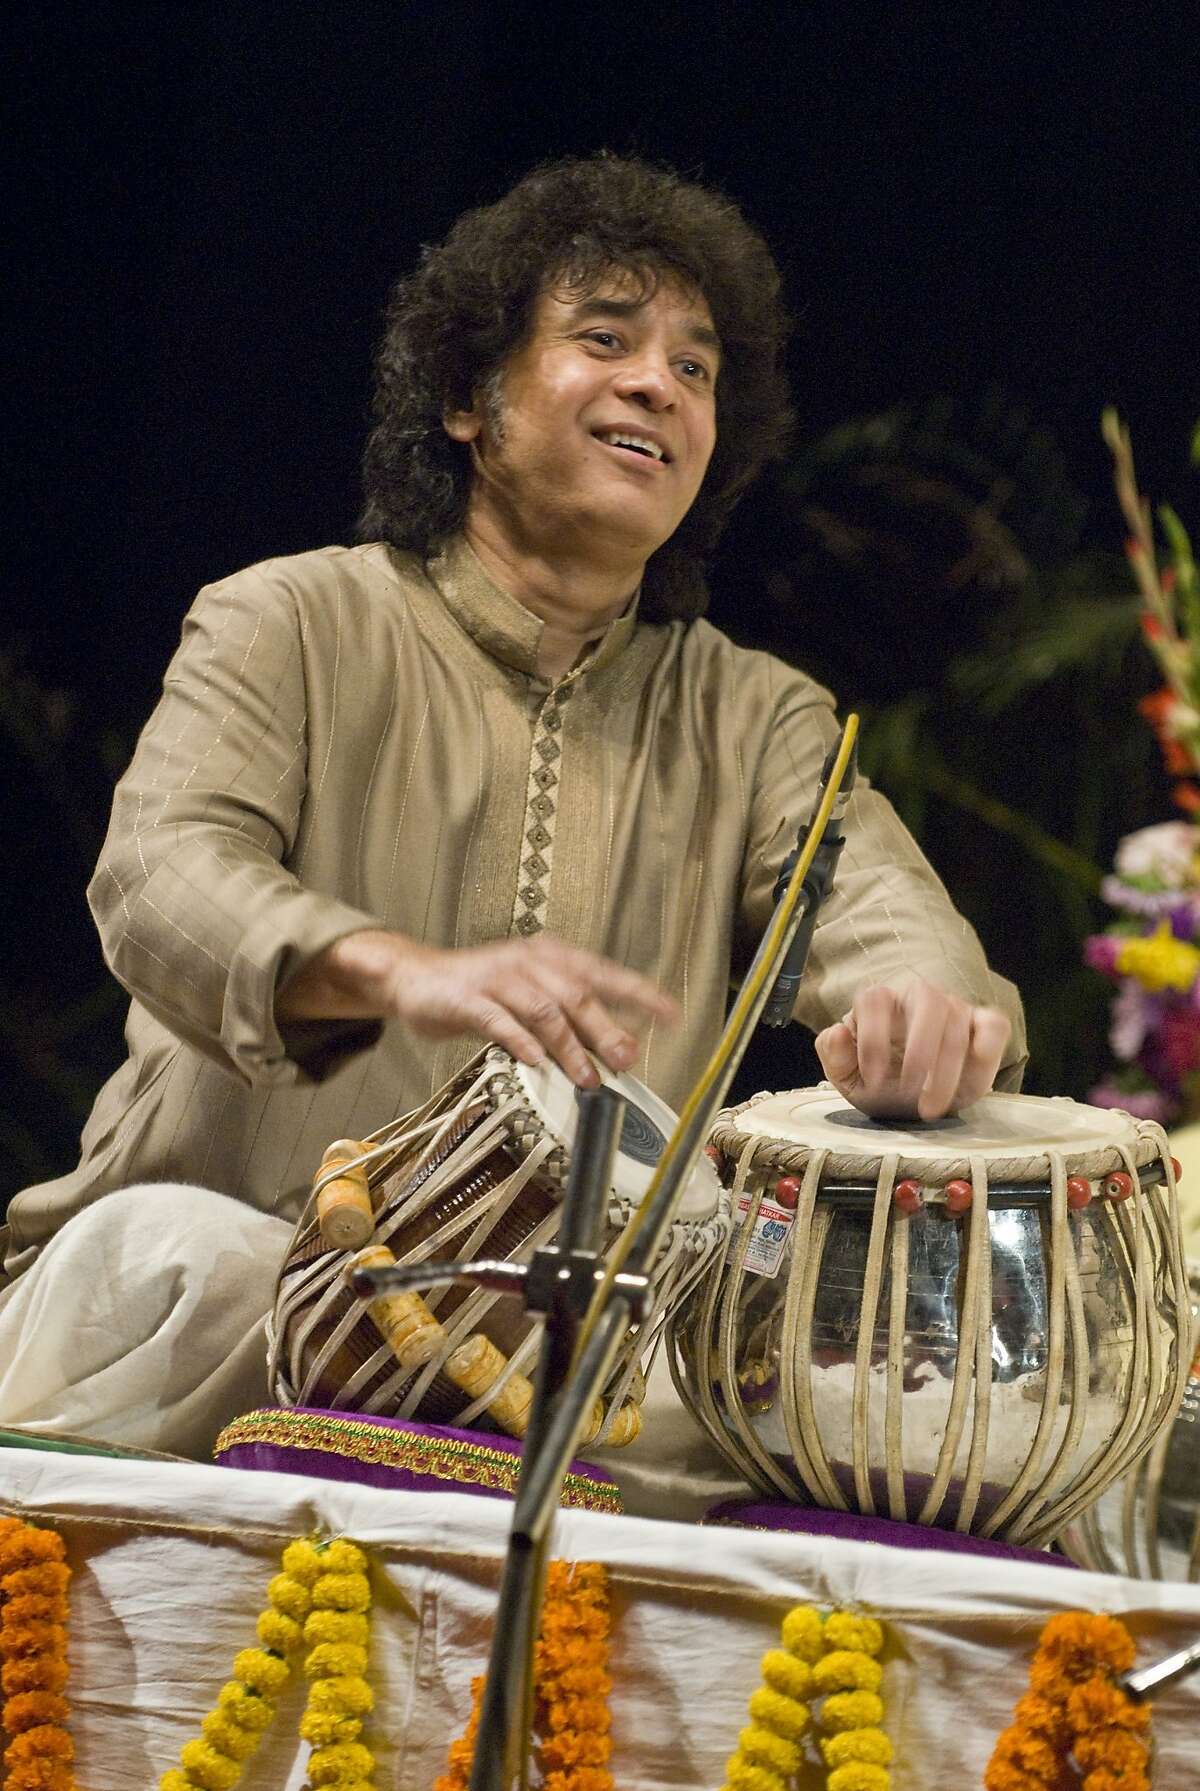 Tabla virtuoso Zakir Hussain leads his Crosscurrents ensemble, featuring prominent jazz and Indian musicians, at SFJAZZ on Friday-Sunday, Oct. 20-22.